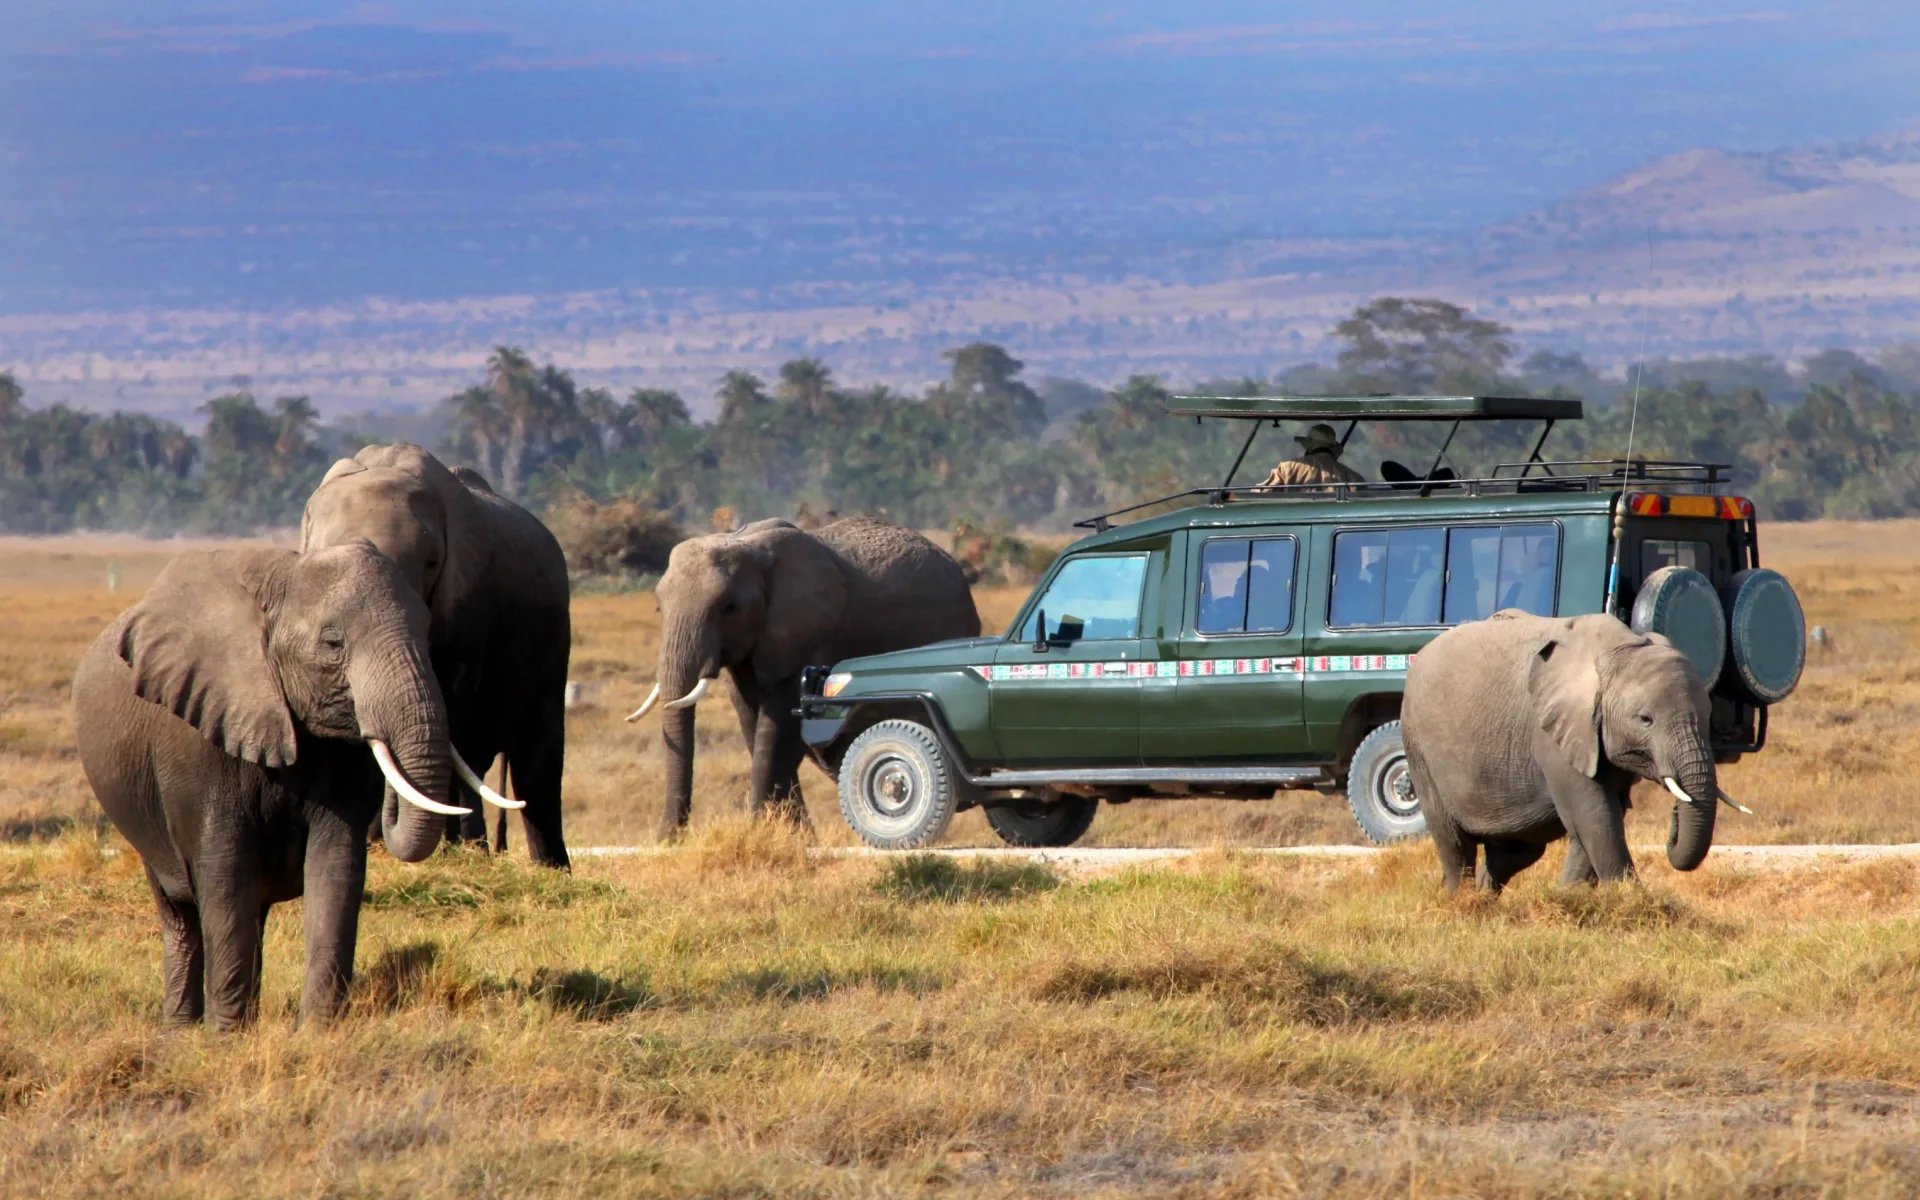 Four African elephants loiter around a 4x4 vehicle on a game drive in the Masai Mara during the afternoon